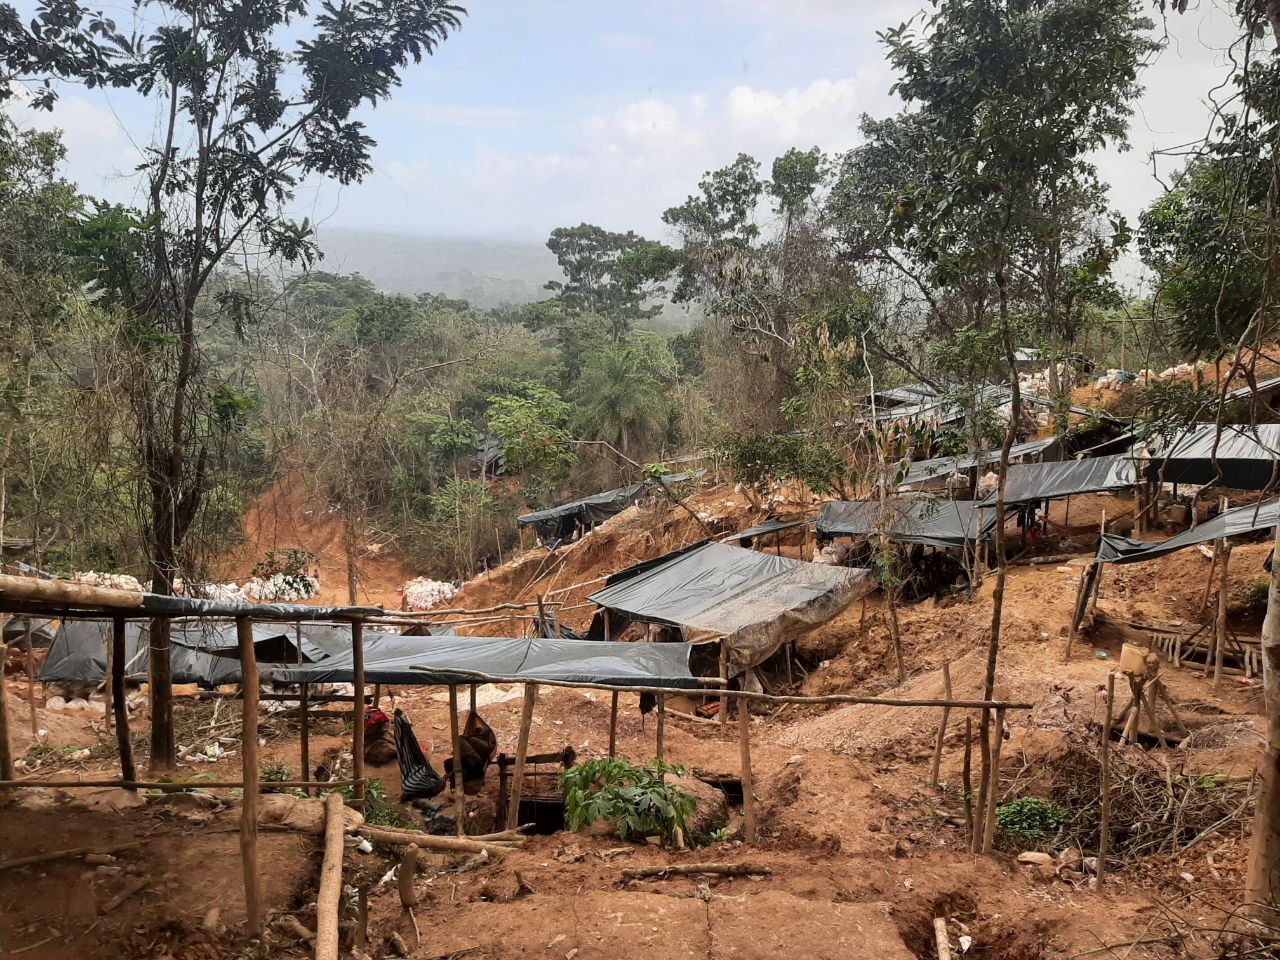 Mayor's Office of Muelle de los Bueyes reveals the practice of "illegal artisanal mining" in the urban case of the city